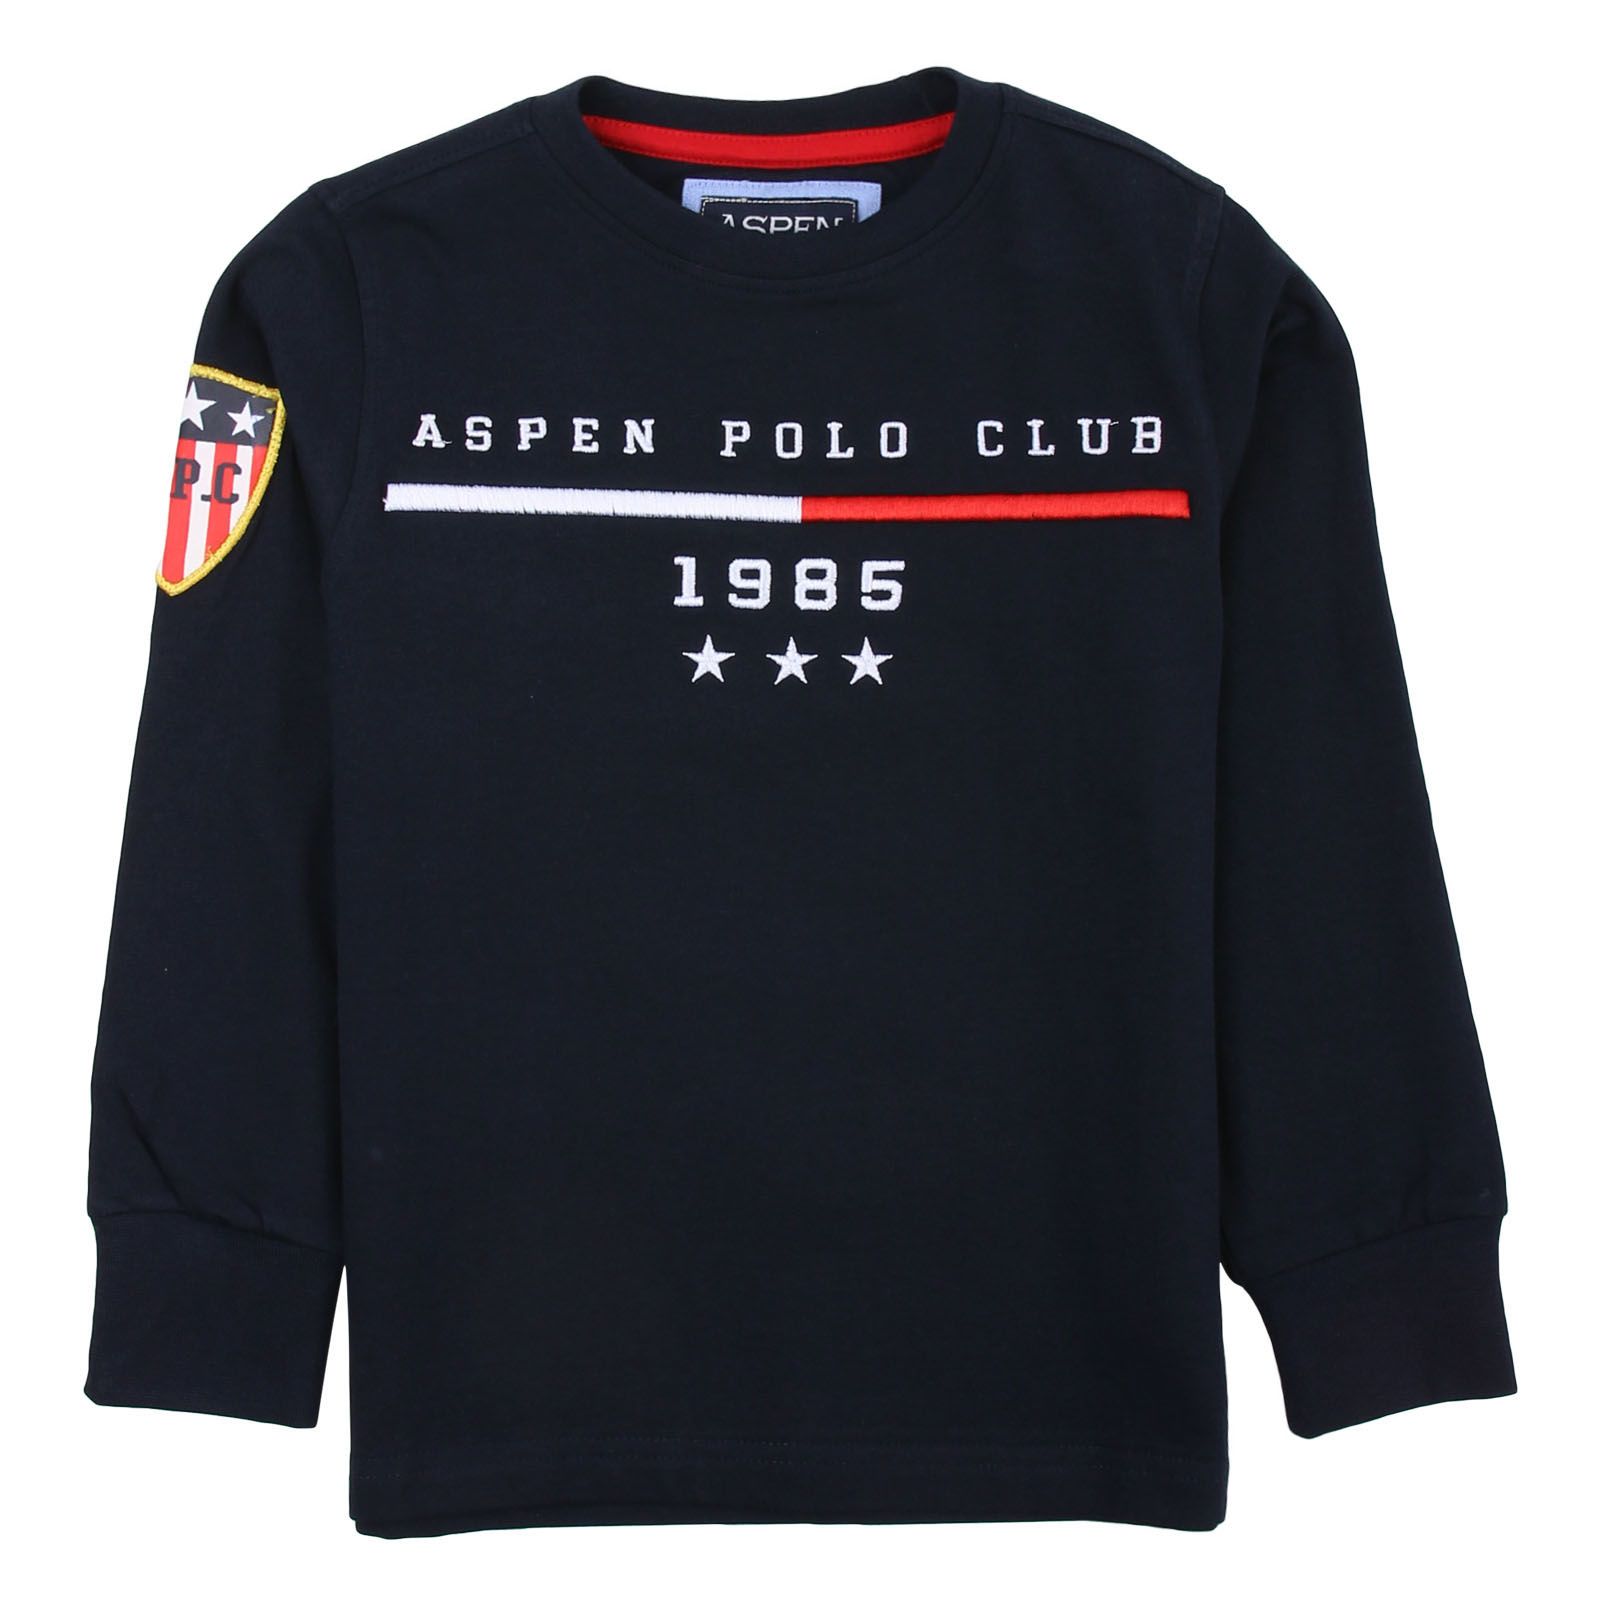 Blue Aspen polo club t-shirt -Details long-sleeved t-shirt, round neckline, blue bottom, front with logo sewn in red and blue, in large size in the center, basic back -Wash max 30 °